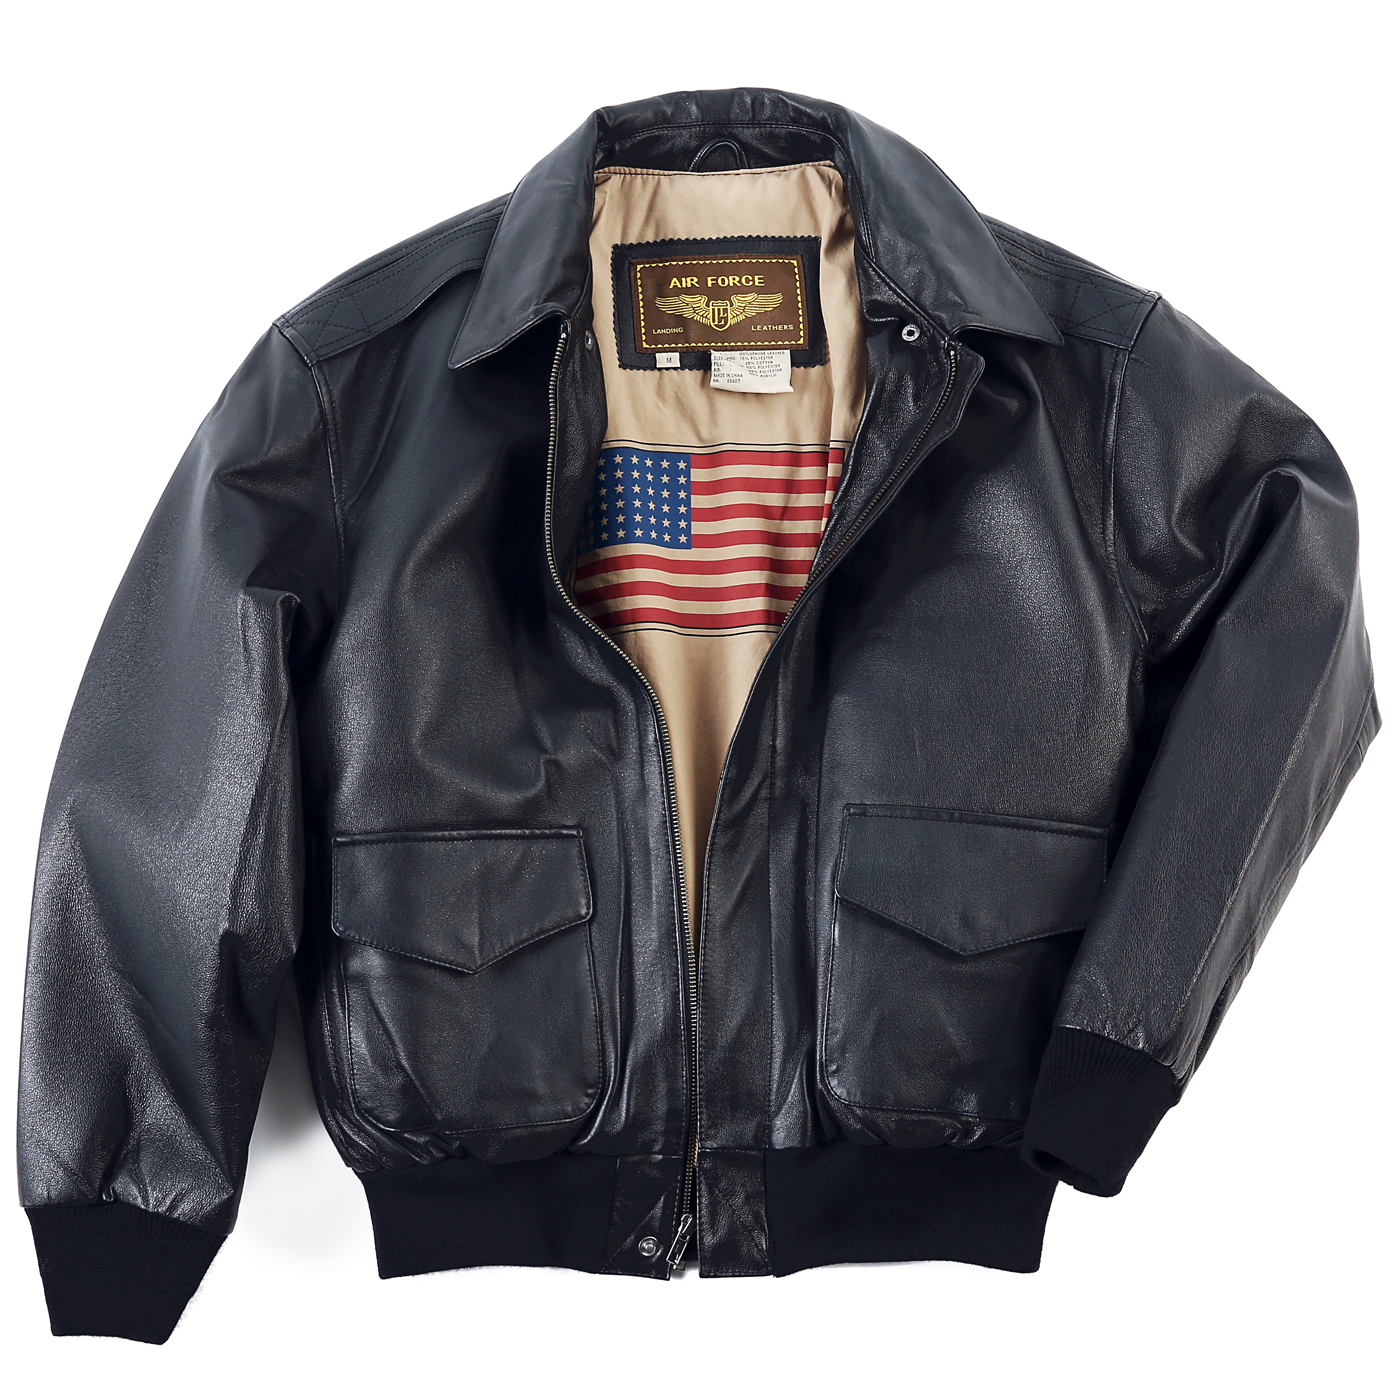 Landing Leathers Mens Air Force A-2 Leather Flight Bomber Jacket (Regular & Tall) - image 1 of 7